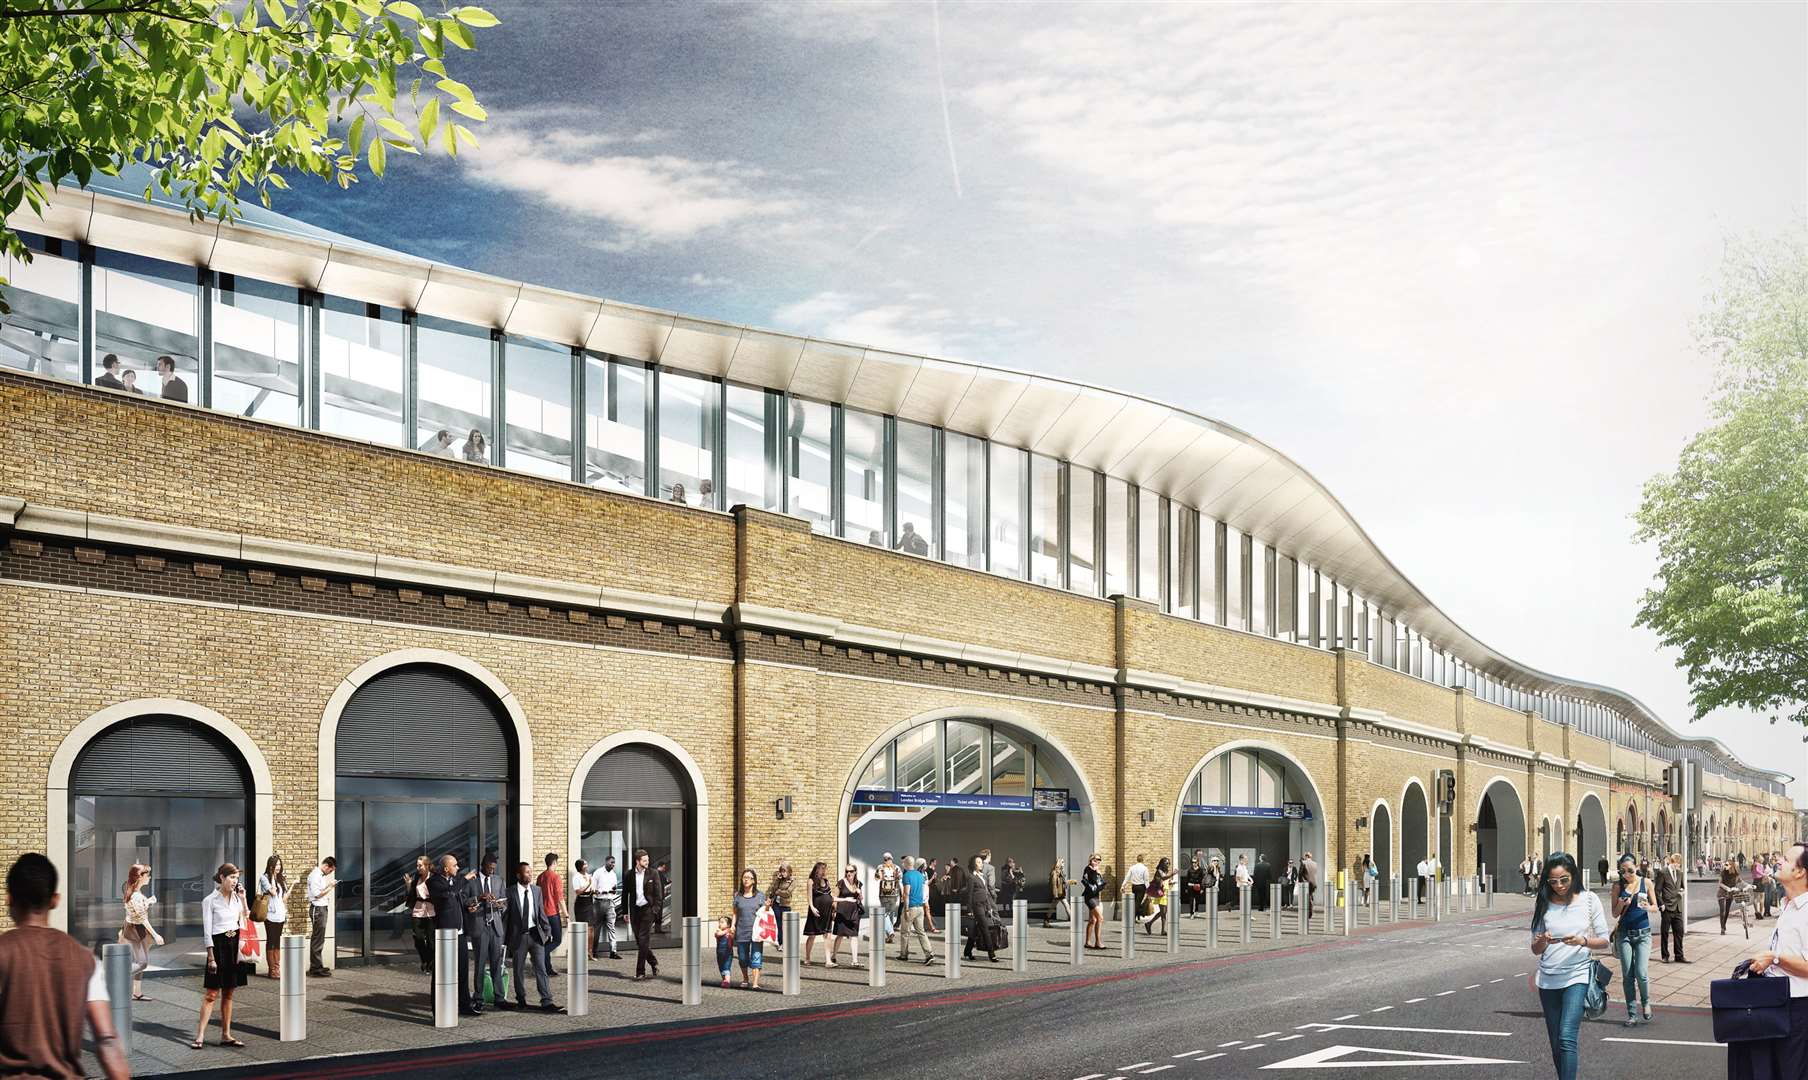 Network Rail hope London Bridge will become an iconic landmark for the city